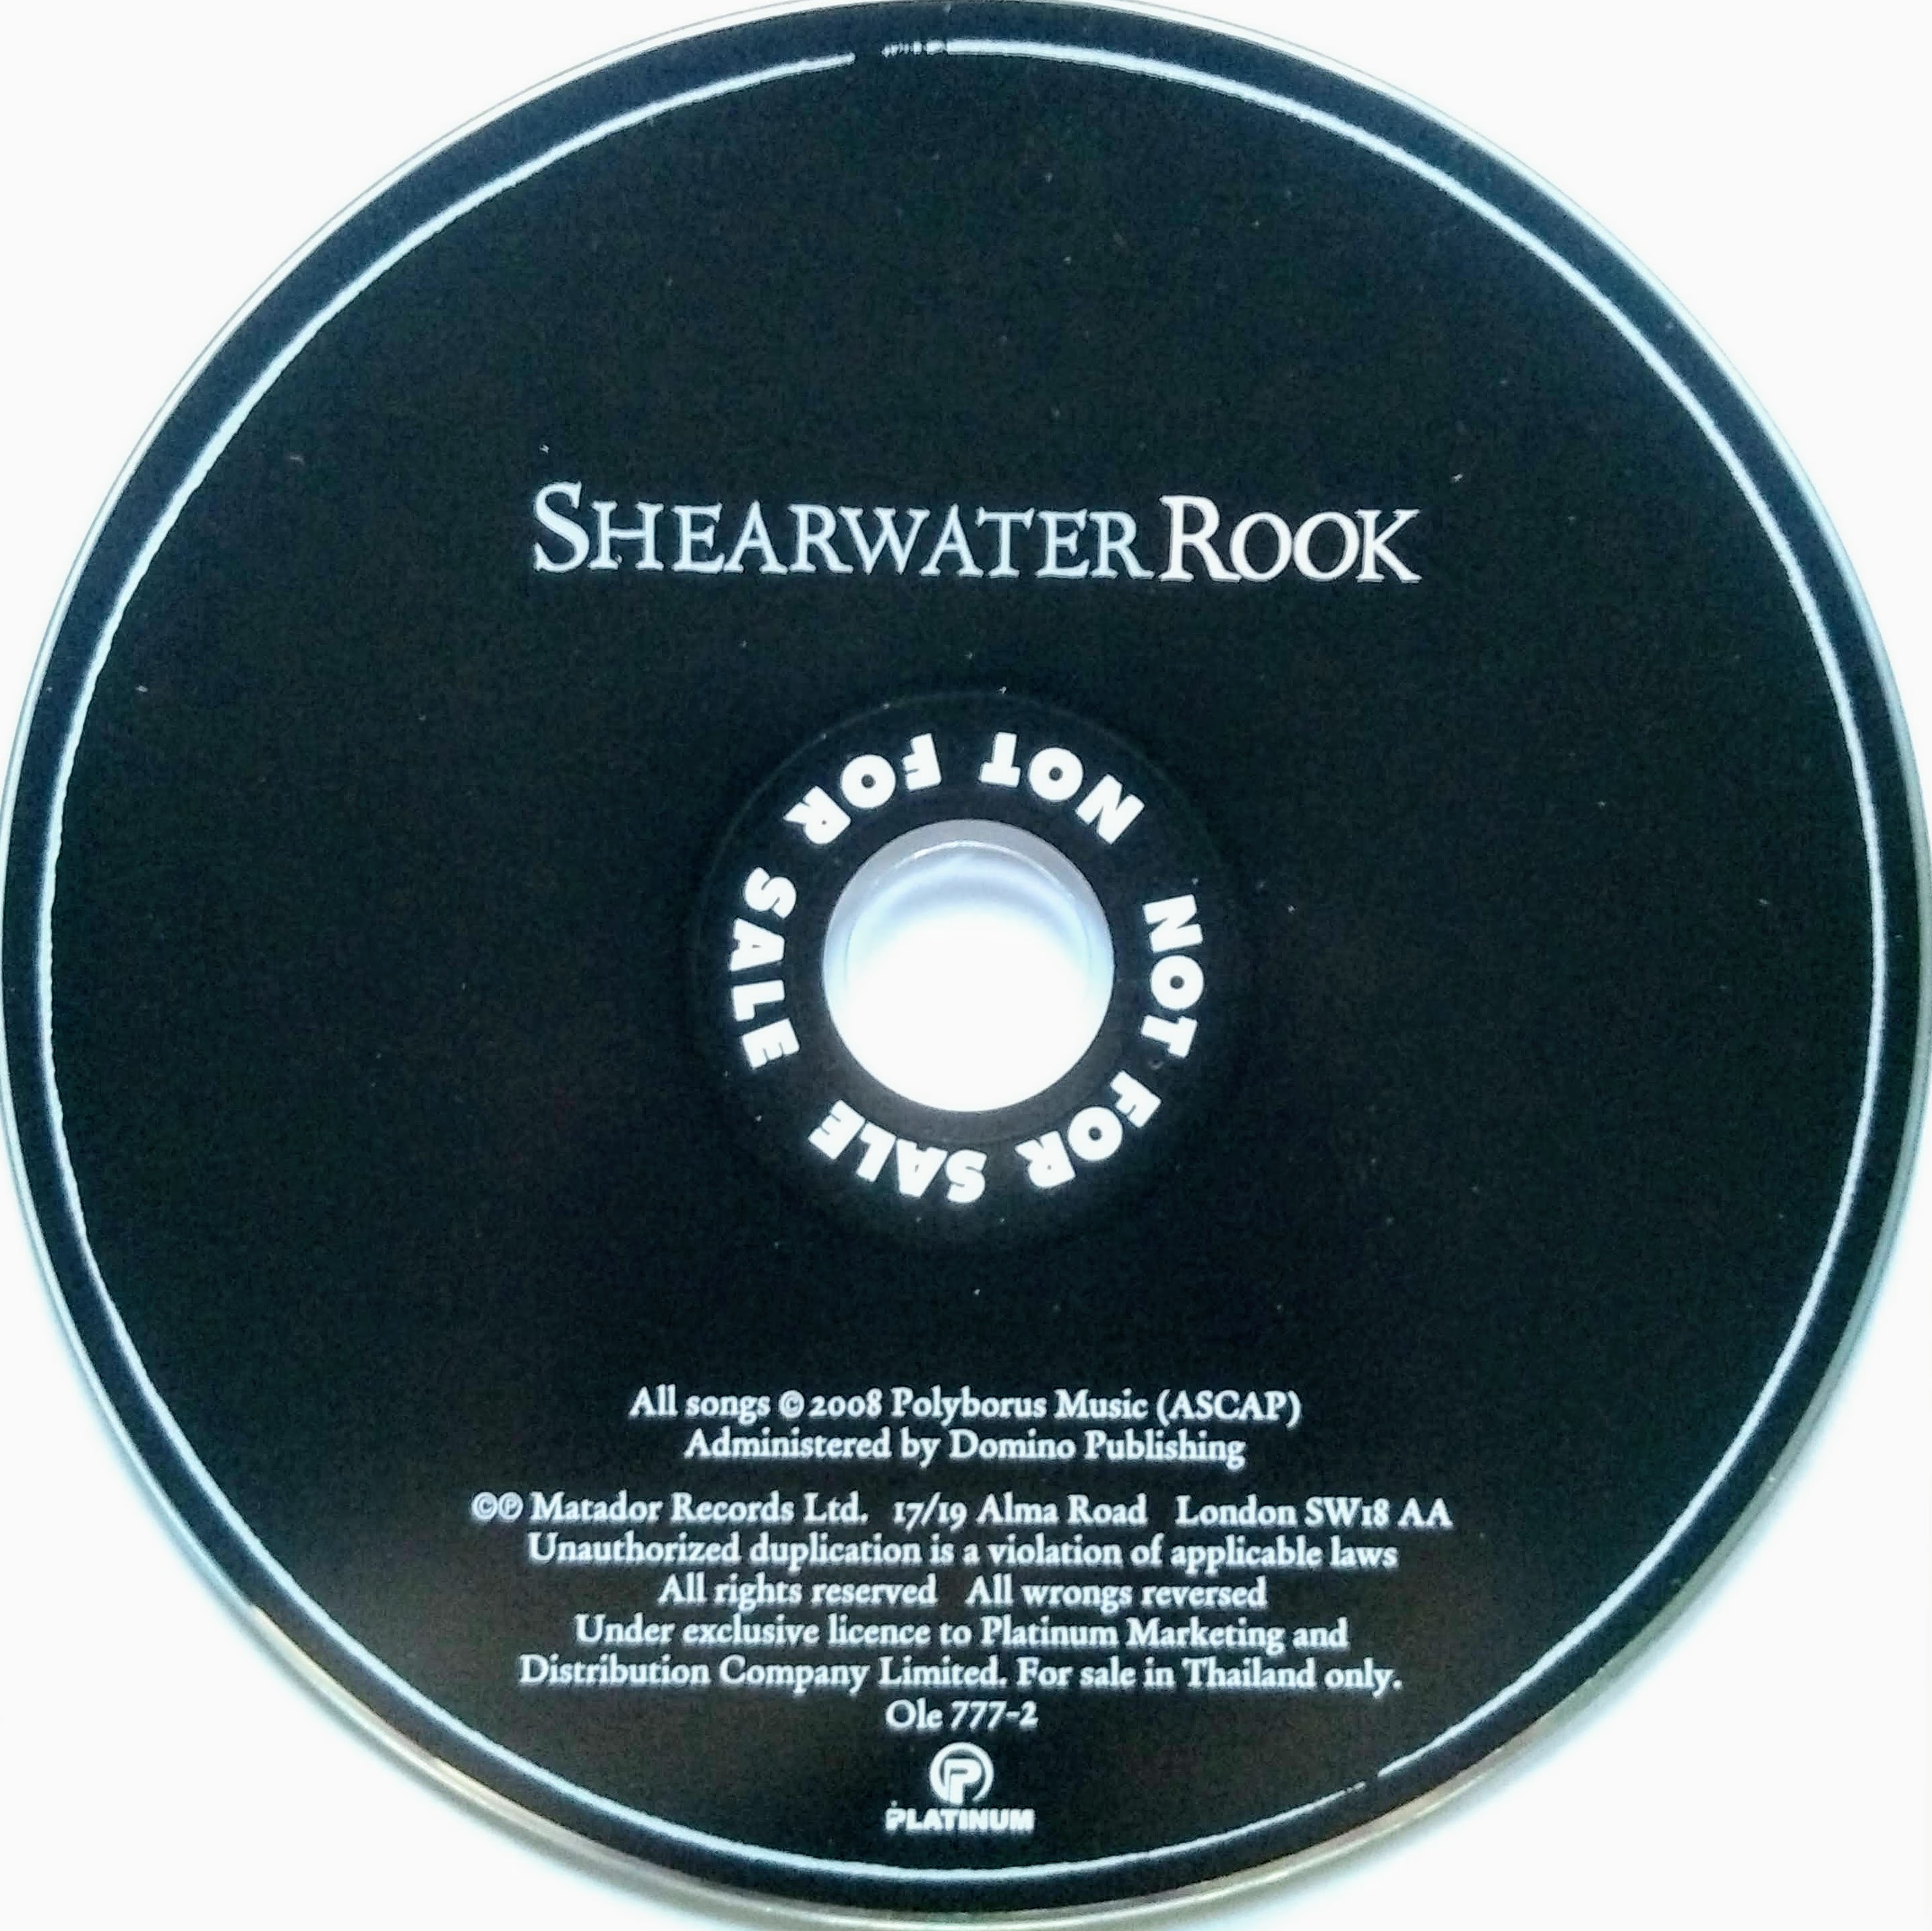 CD (Promotion) Shearwater - Rook (CD Only)